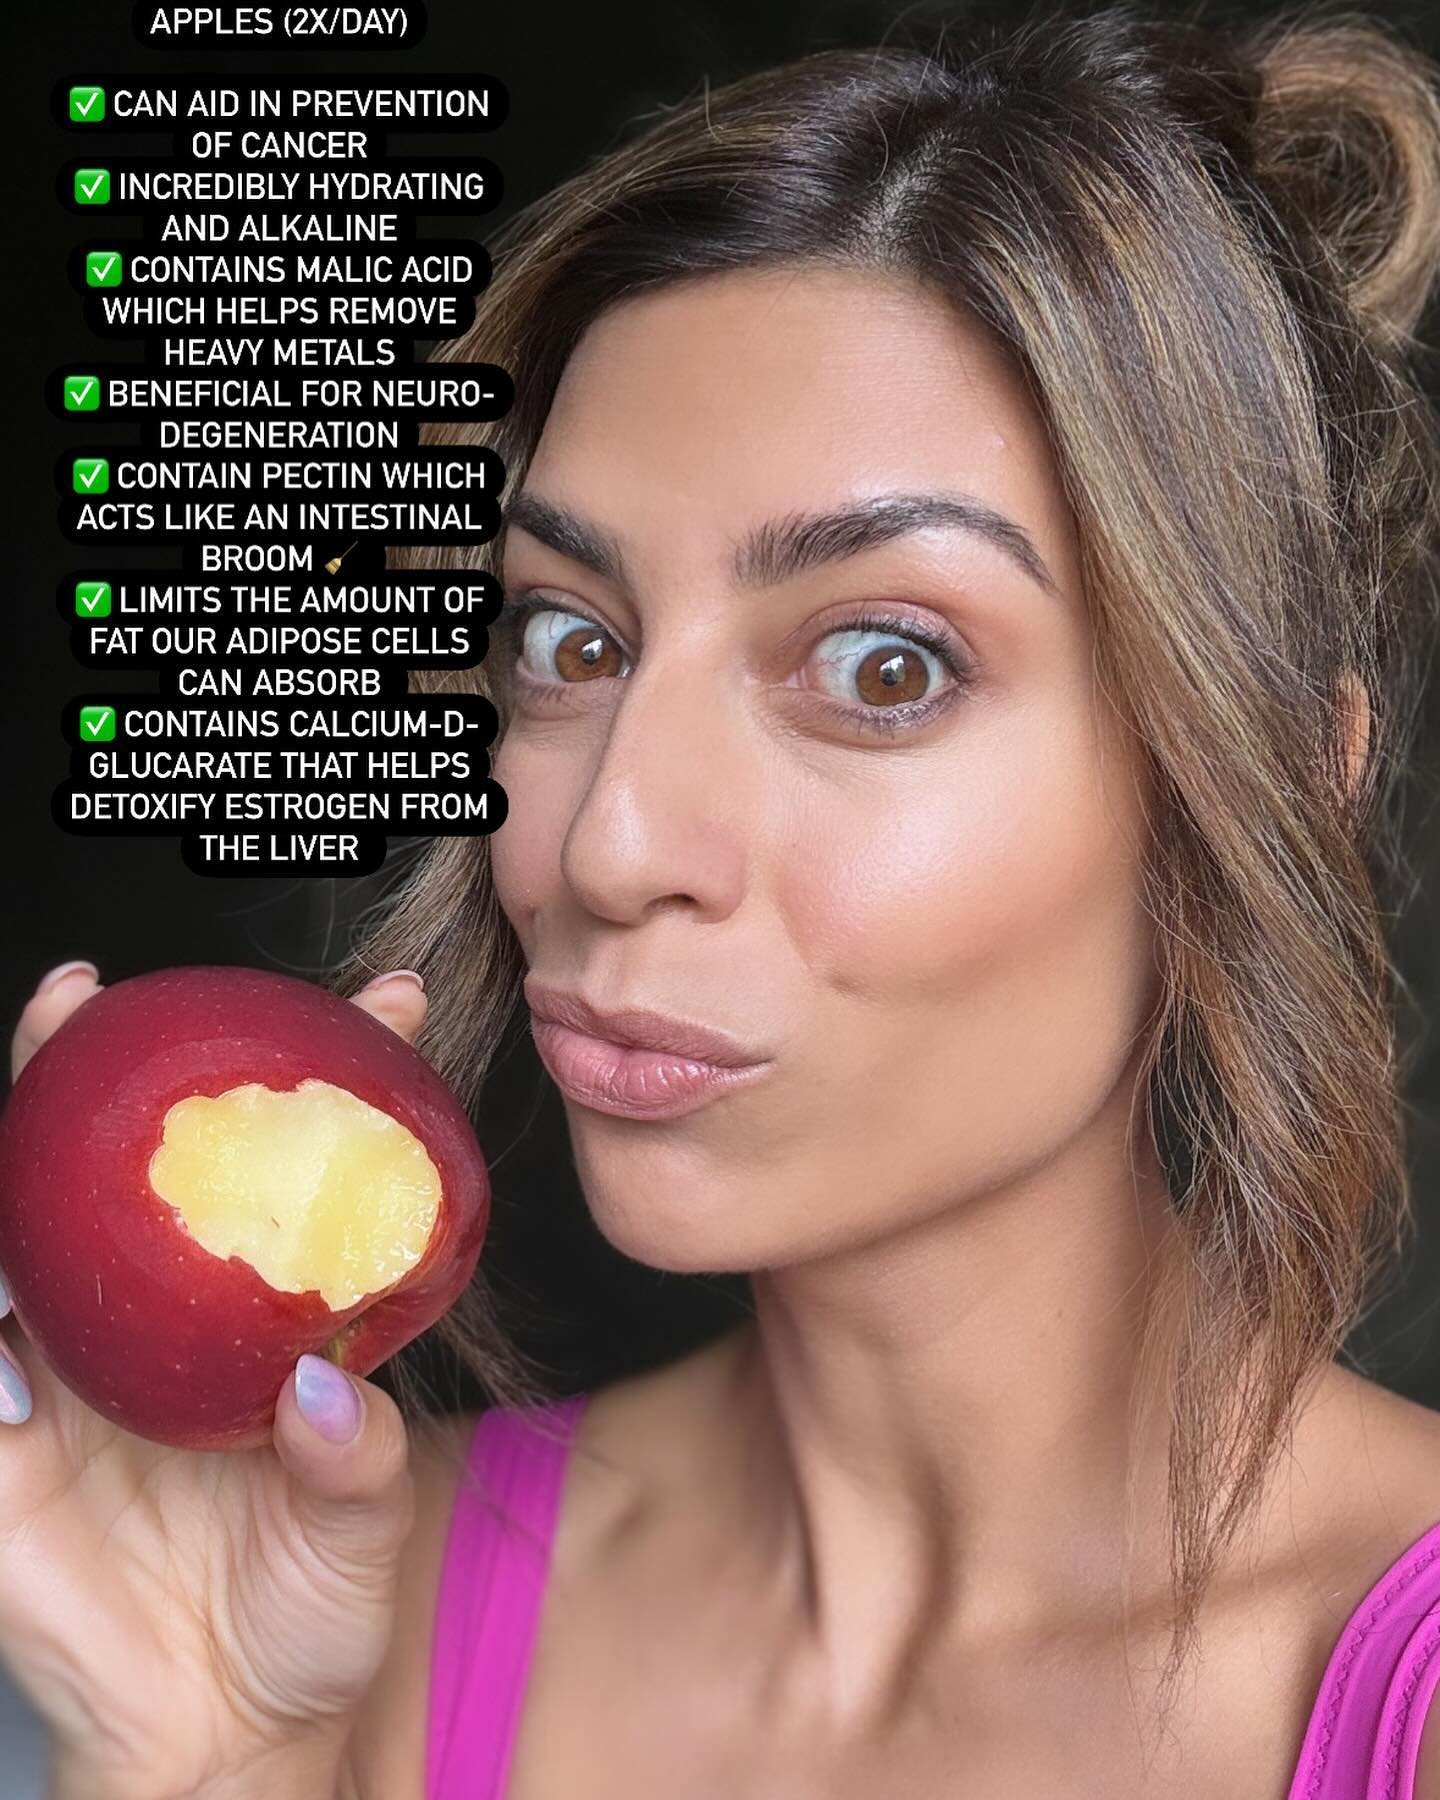 🍎 Apples are such an incredible food. We often hear, &ldquo;an apple a day keeps the doctor away&rdquo;, but have you ever wondered why? I naturally gravitate to apples. They are easy and delicious and can be prepared in so many ways. And just look 